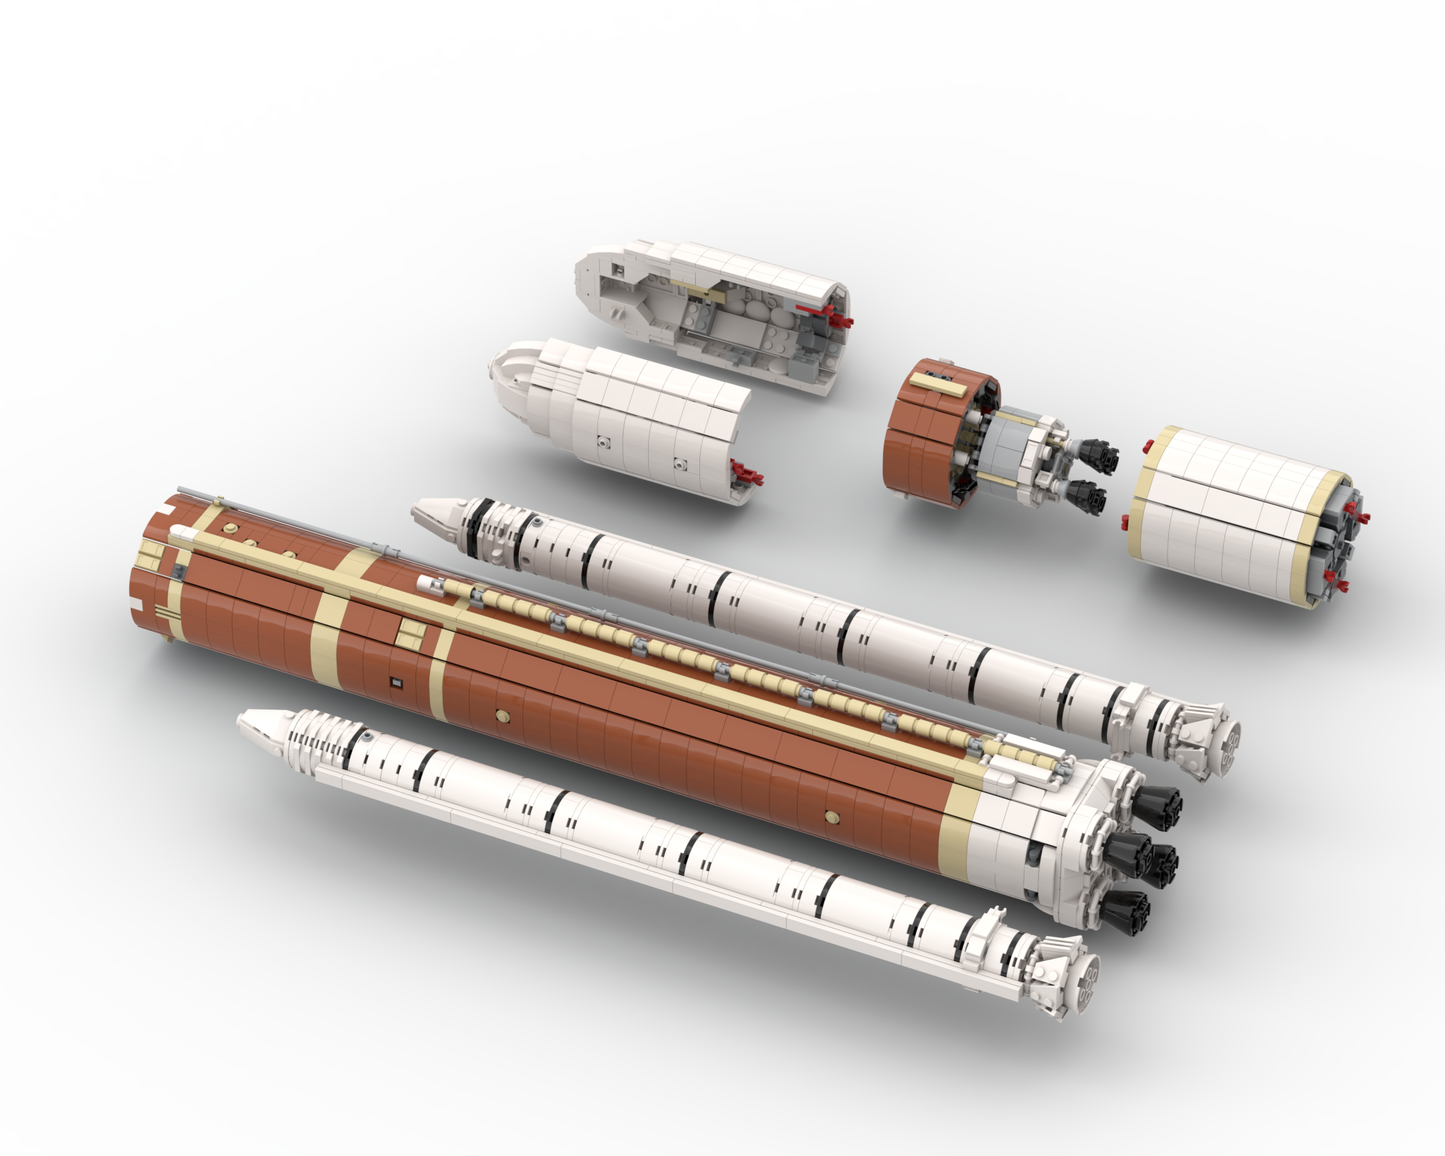 NASA Space Launch System Family (SLS)